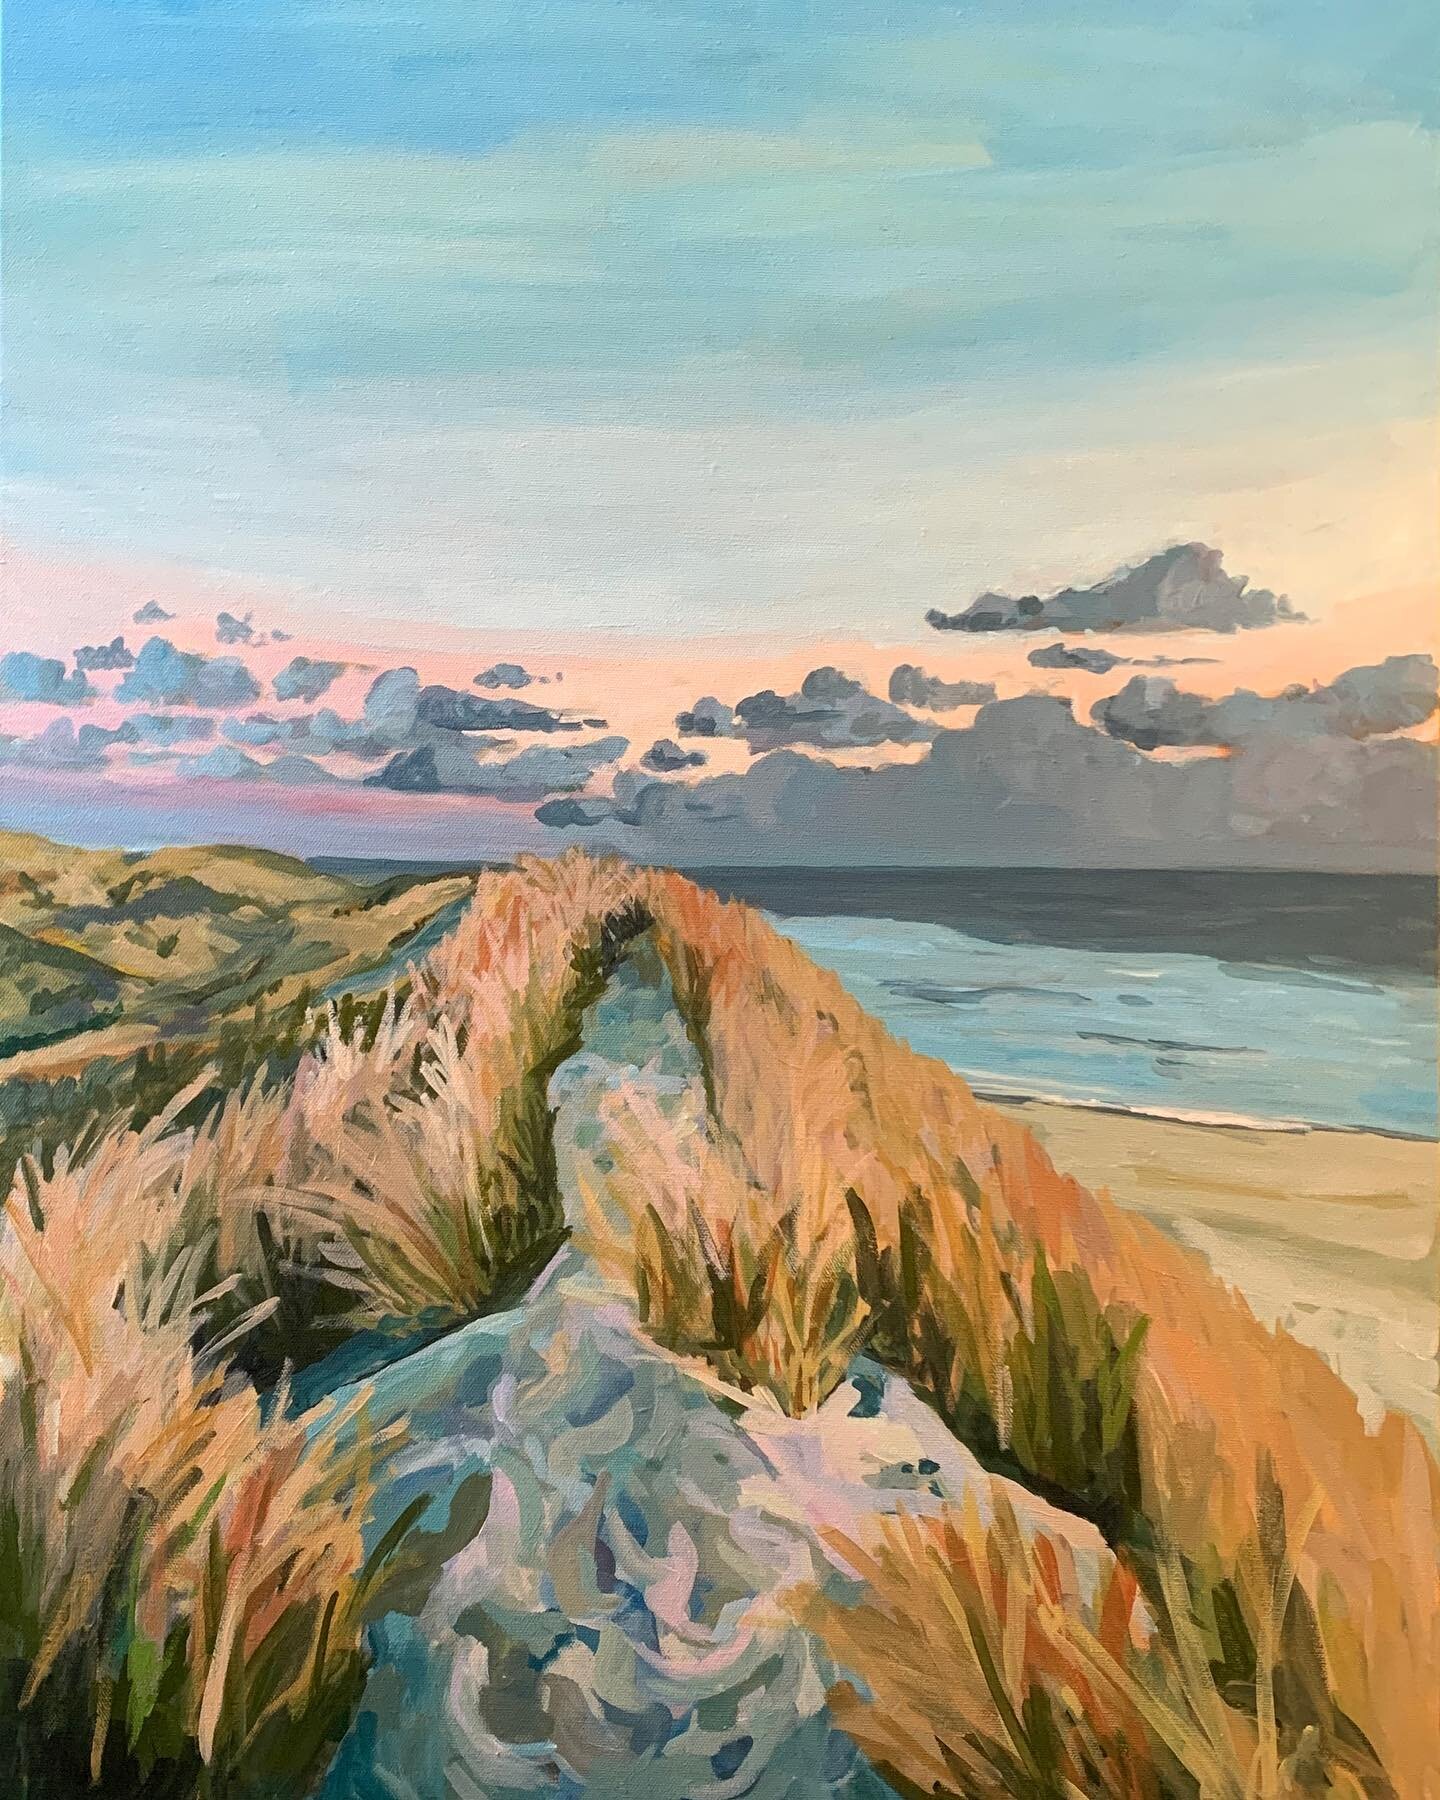 *still in progress* 

This is the first of many beach landscapes to come. All of my love for Lake Michigan needs an outlet. ✨

This piece is 2 feet by 3 feet and will be available within the next two weeks! Message me to claim! If you&rsquo;d like to